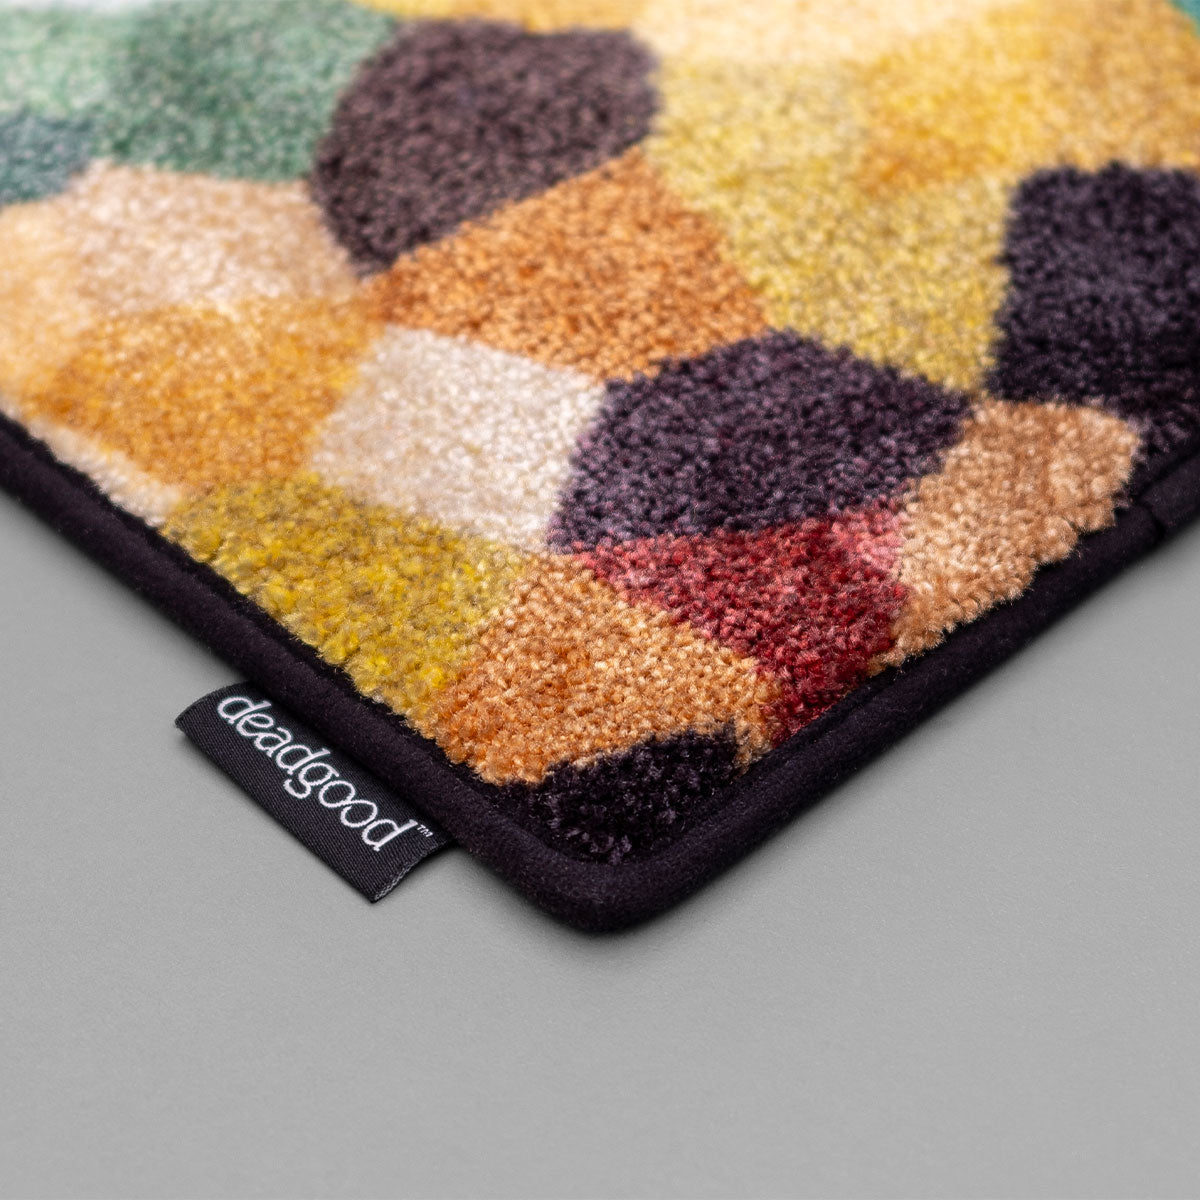 Environmentally responsible practices in rug manufacturing for business environments